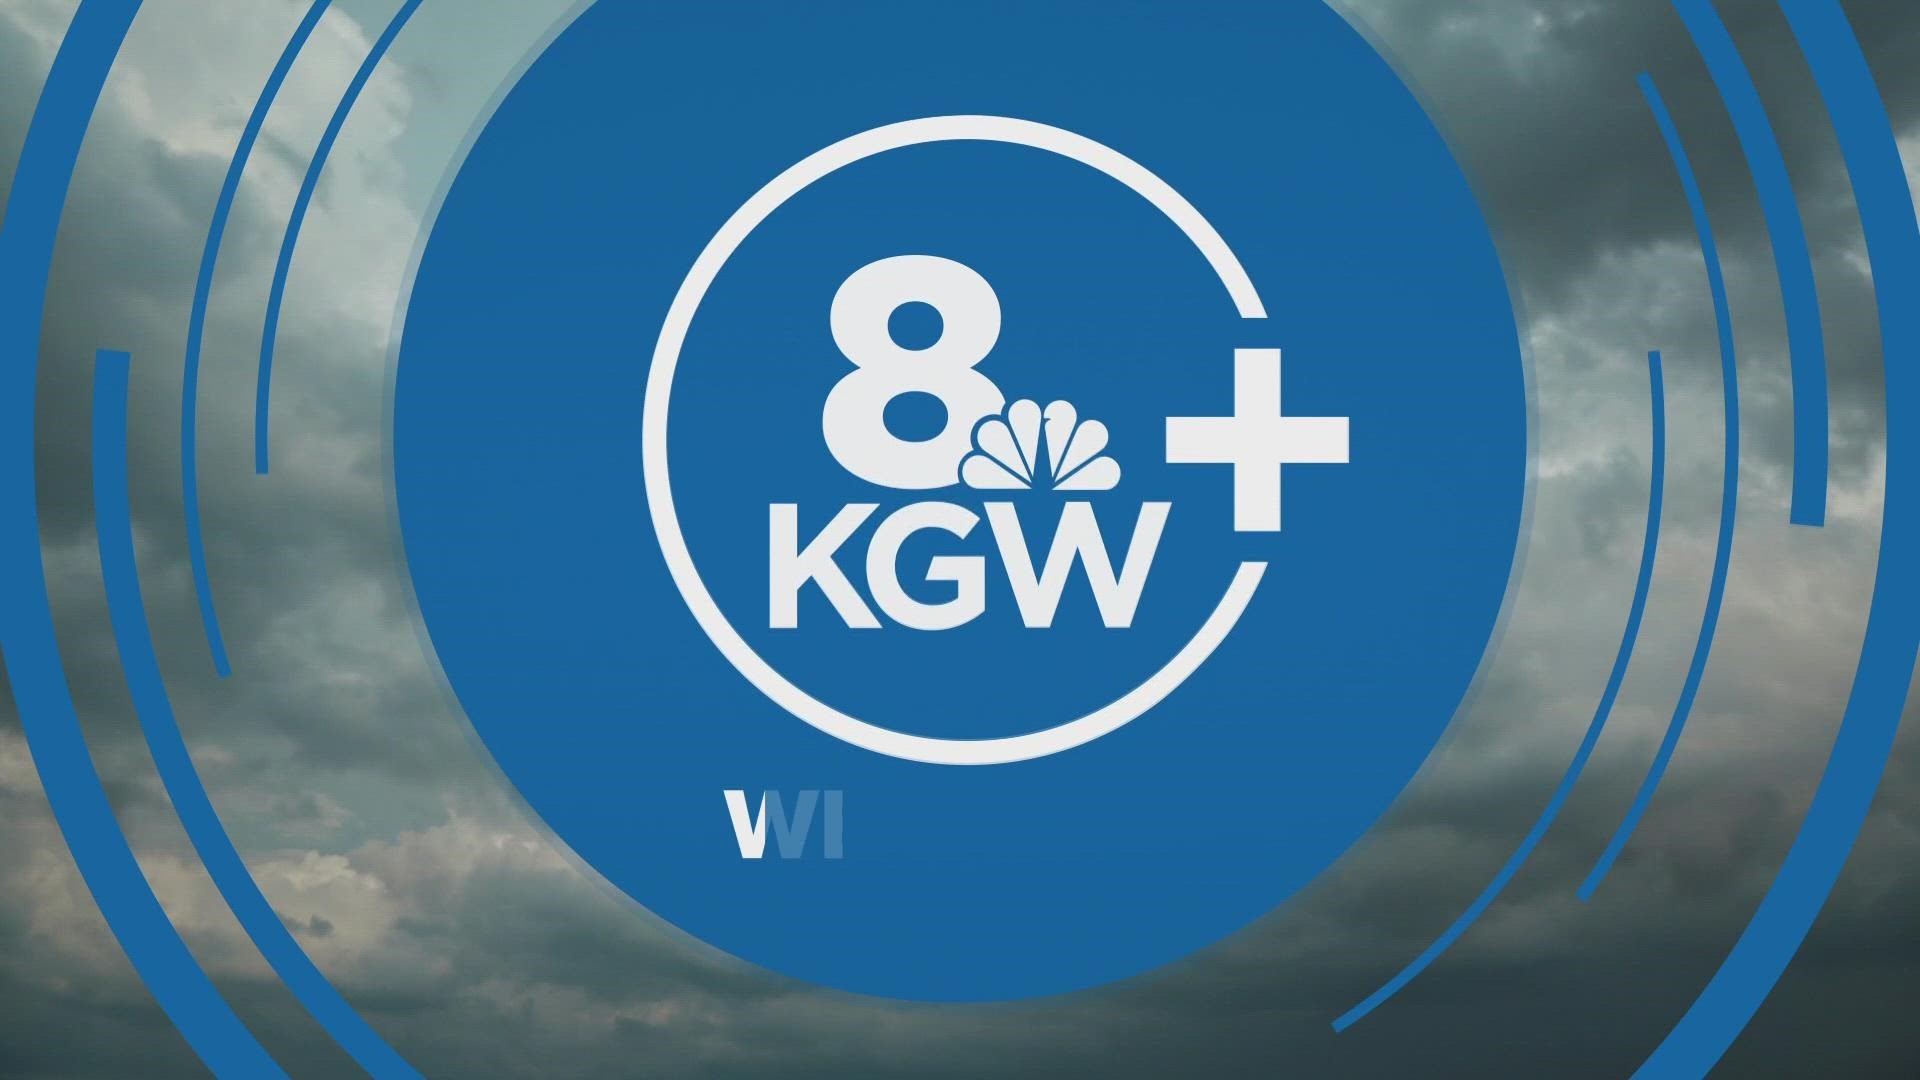 KGW chief meteorologist Matt Zaffino explains why hurricanes don't form in the pacific northwest